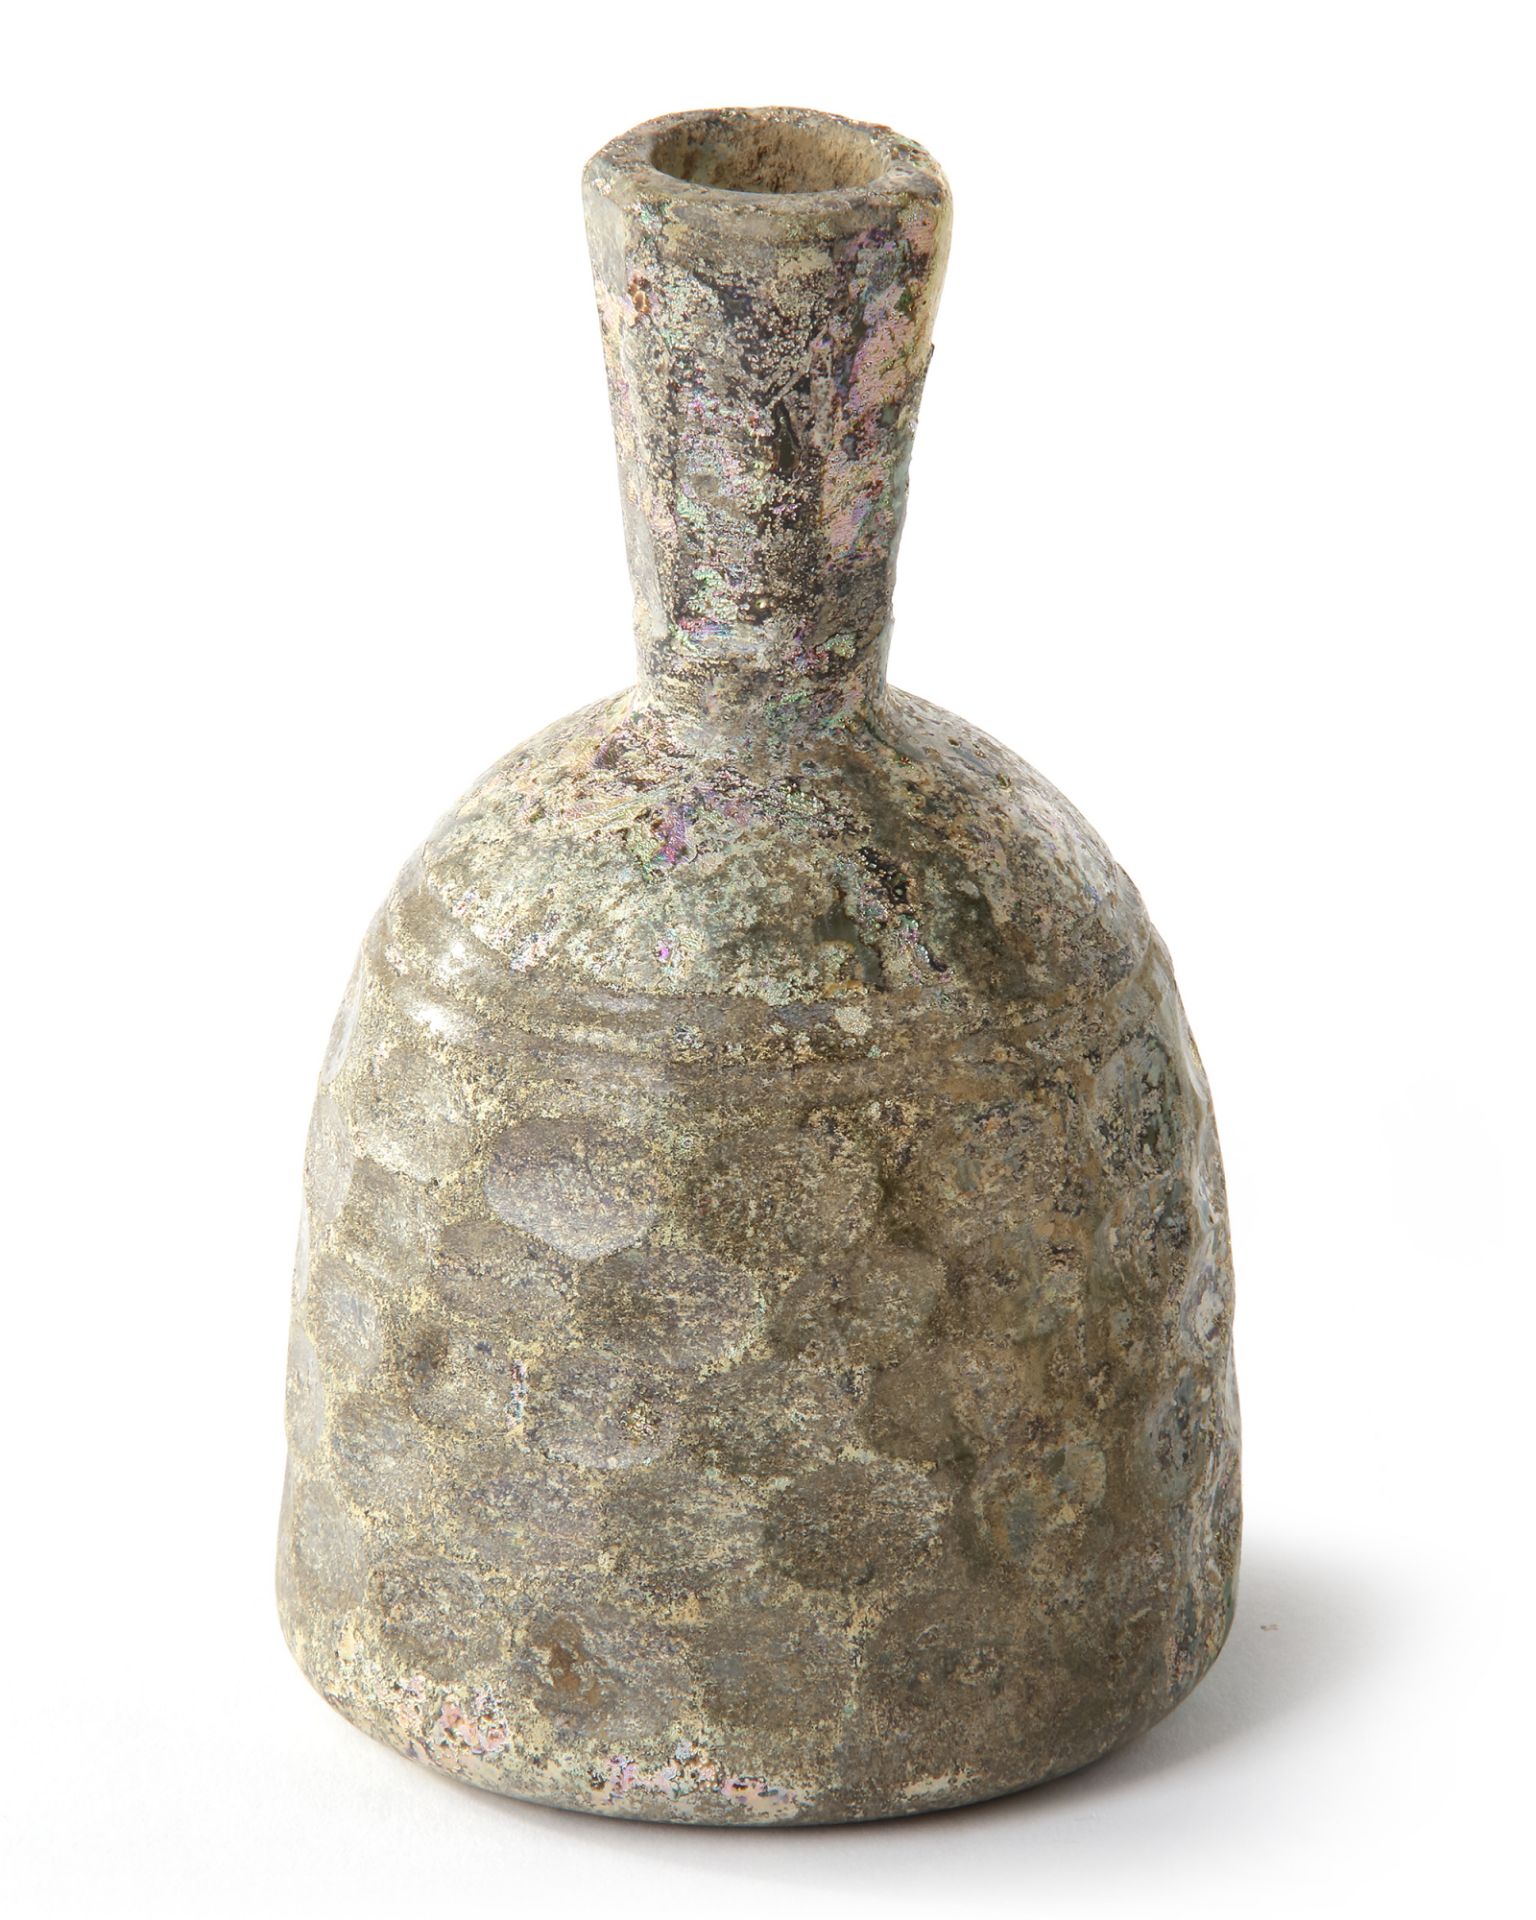 A HONEYCOMB FACTED WHEEL-CUT GLASS BOTTLE, PERSIA, CIRCA 10TH CENTURY - Image 2 of 3